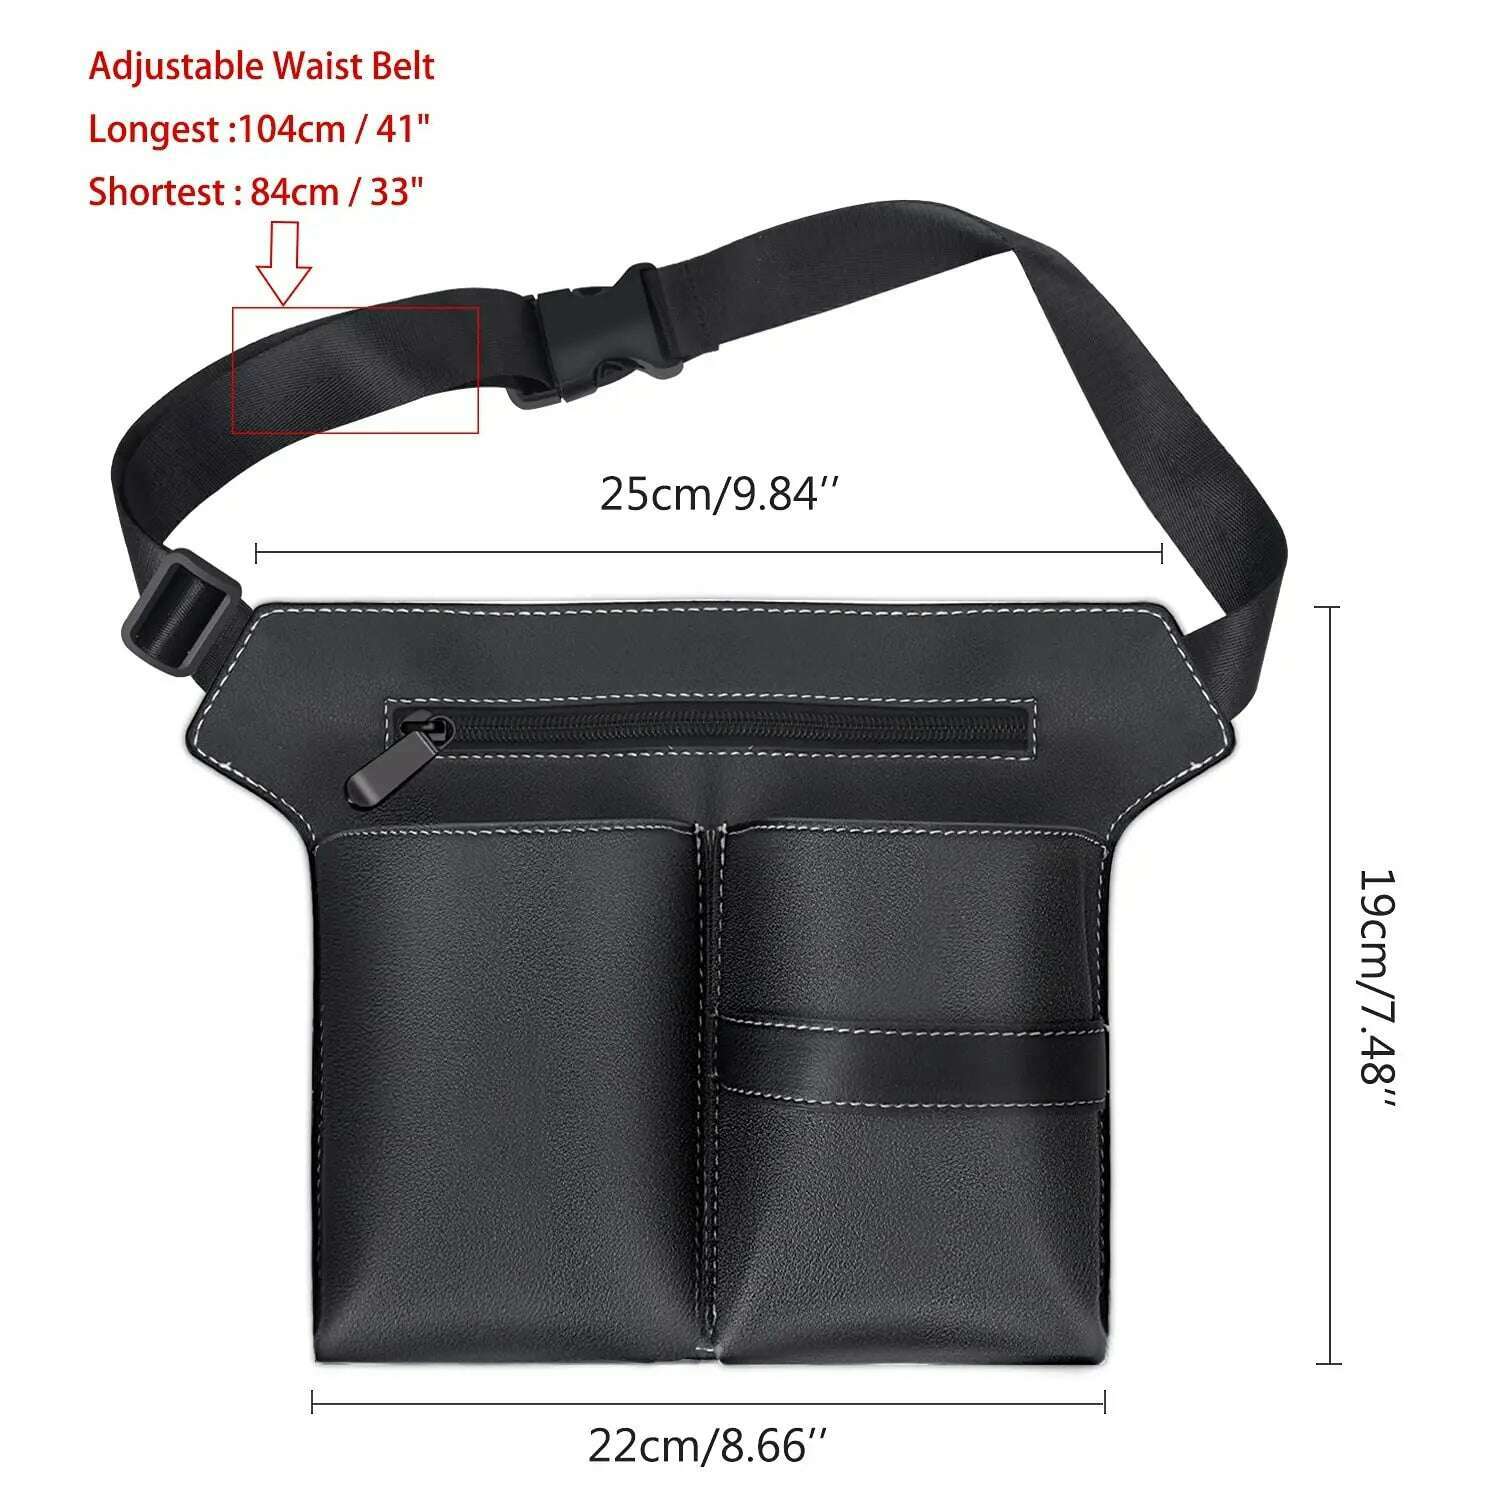 KIMLUD, NEW Hair Scissor Bag Clips Comb Case Hairdressing Barber Holster Bags Holder Tool Salon Waist Pack Belt PU Leather Bag, without logo, KIMLUD Women's Clothes